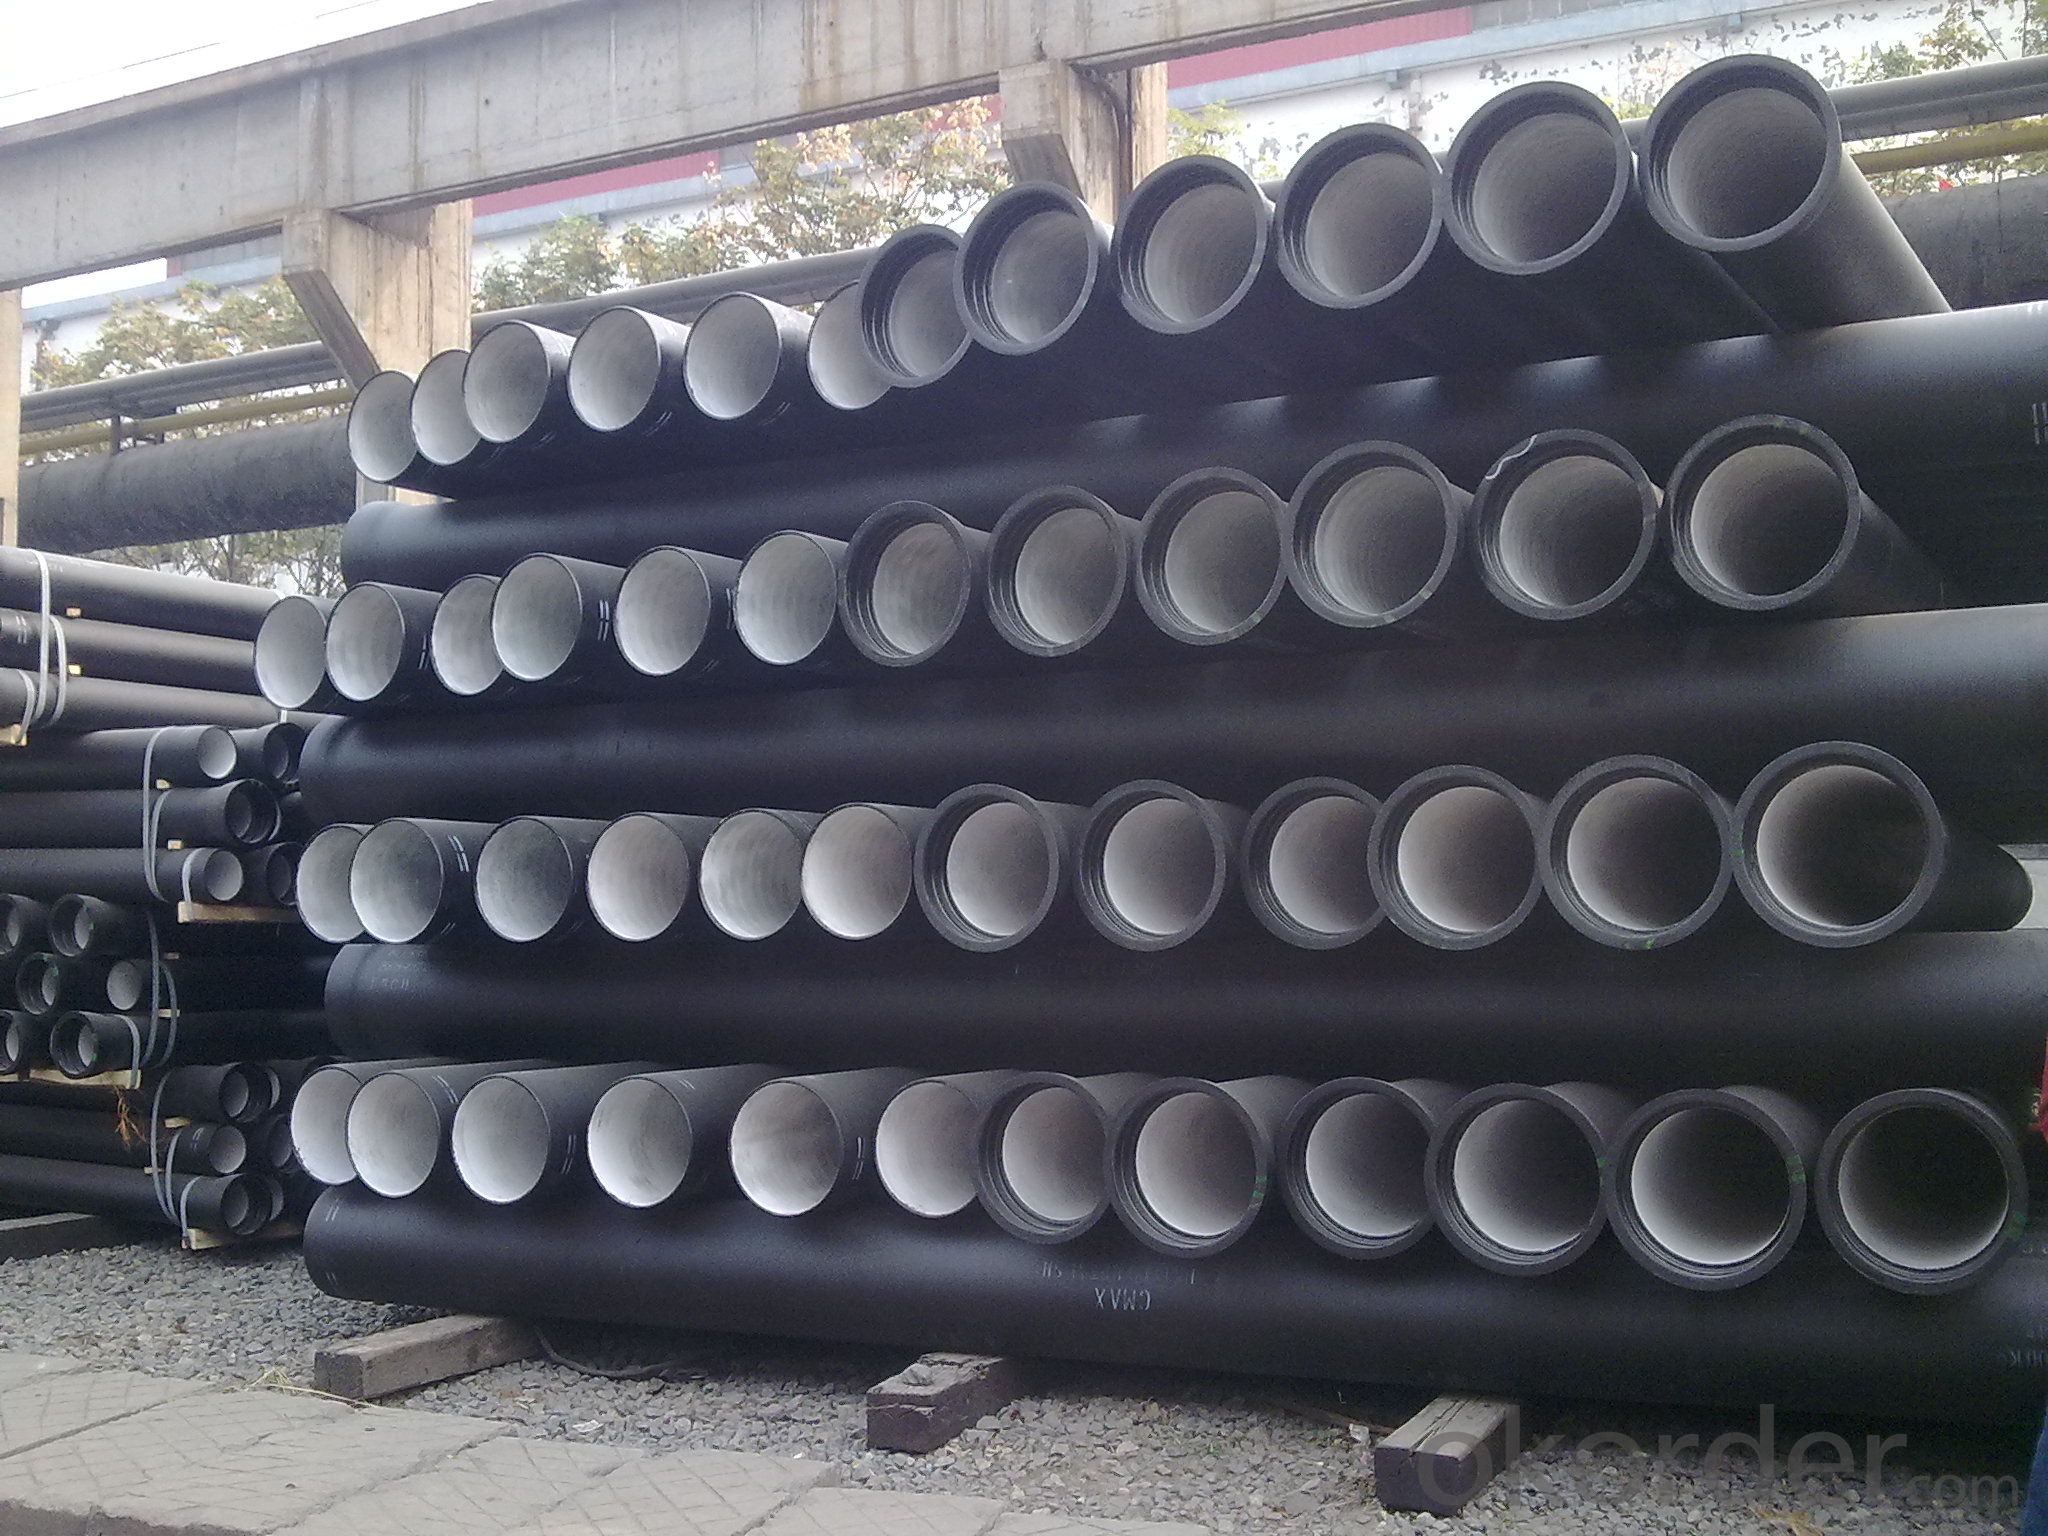 Ductile Iron Pipe DN400 real-time quotes, last-sale prices -Okorder.com